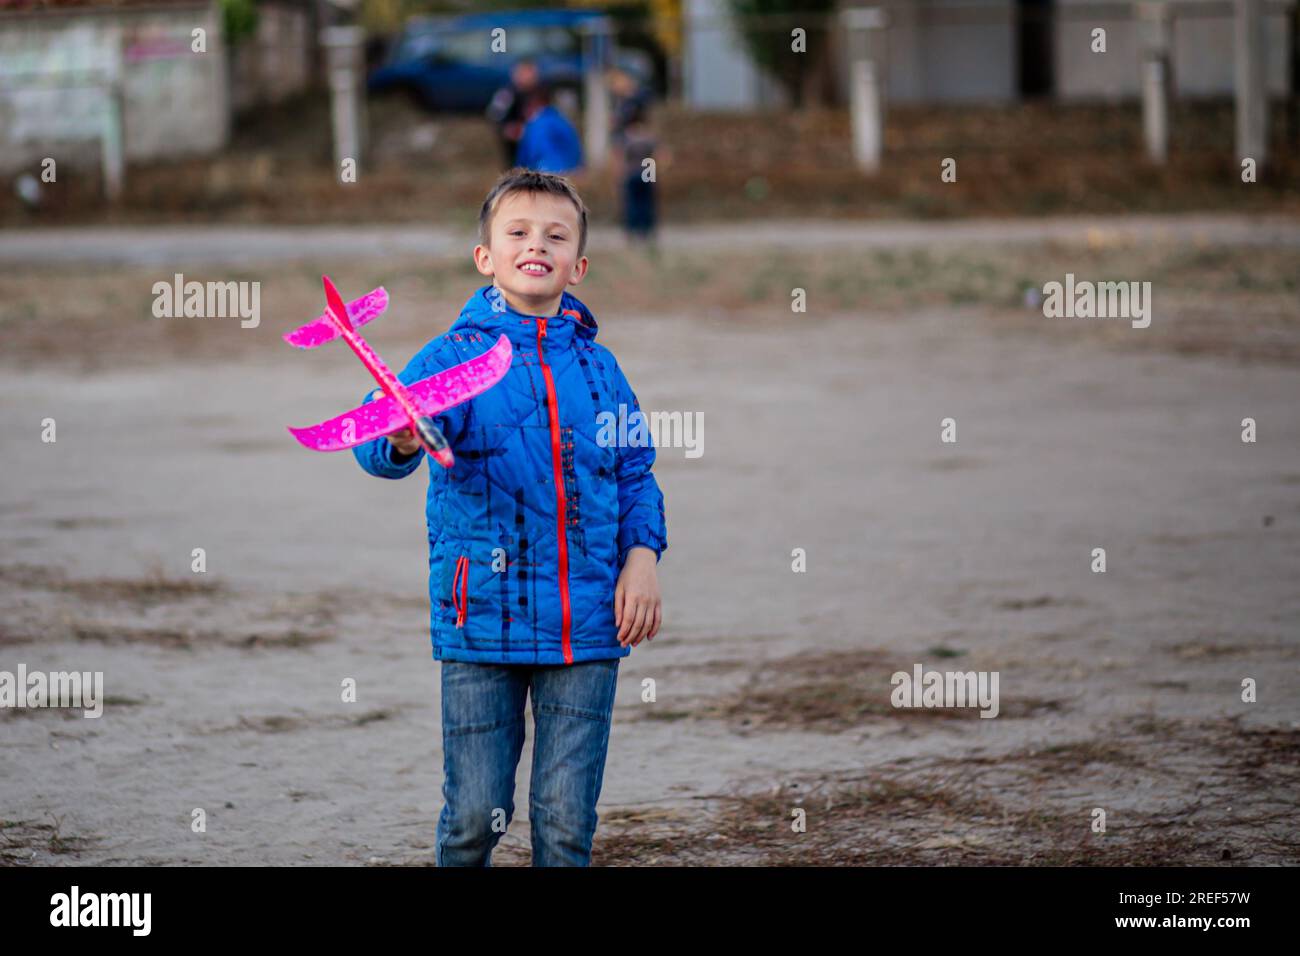 boy lets his toy plane take flight on the sports field. Curious boy plays with airplanes. Development of children's imagination Stock Photo